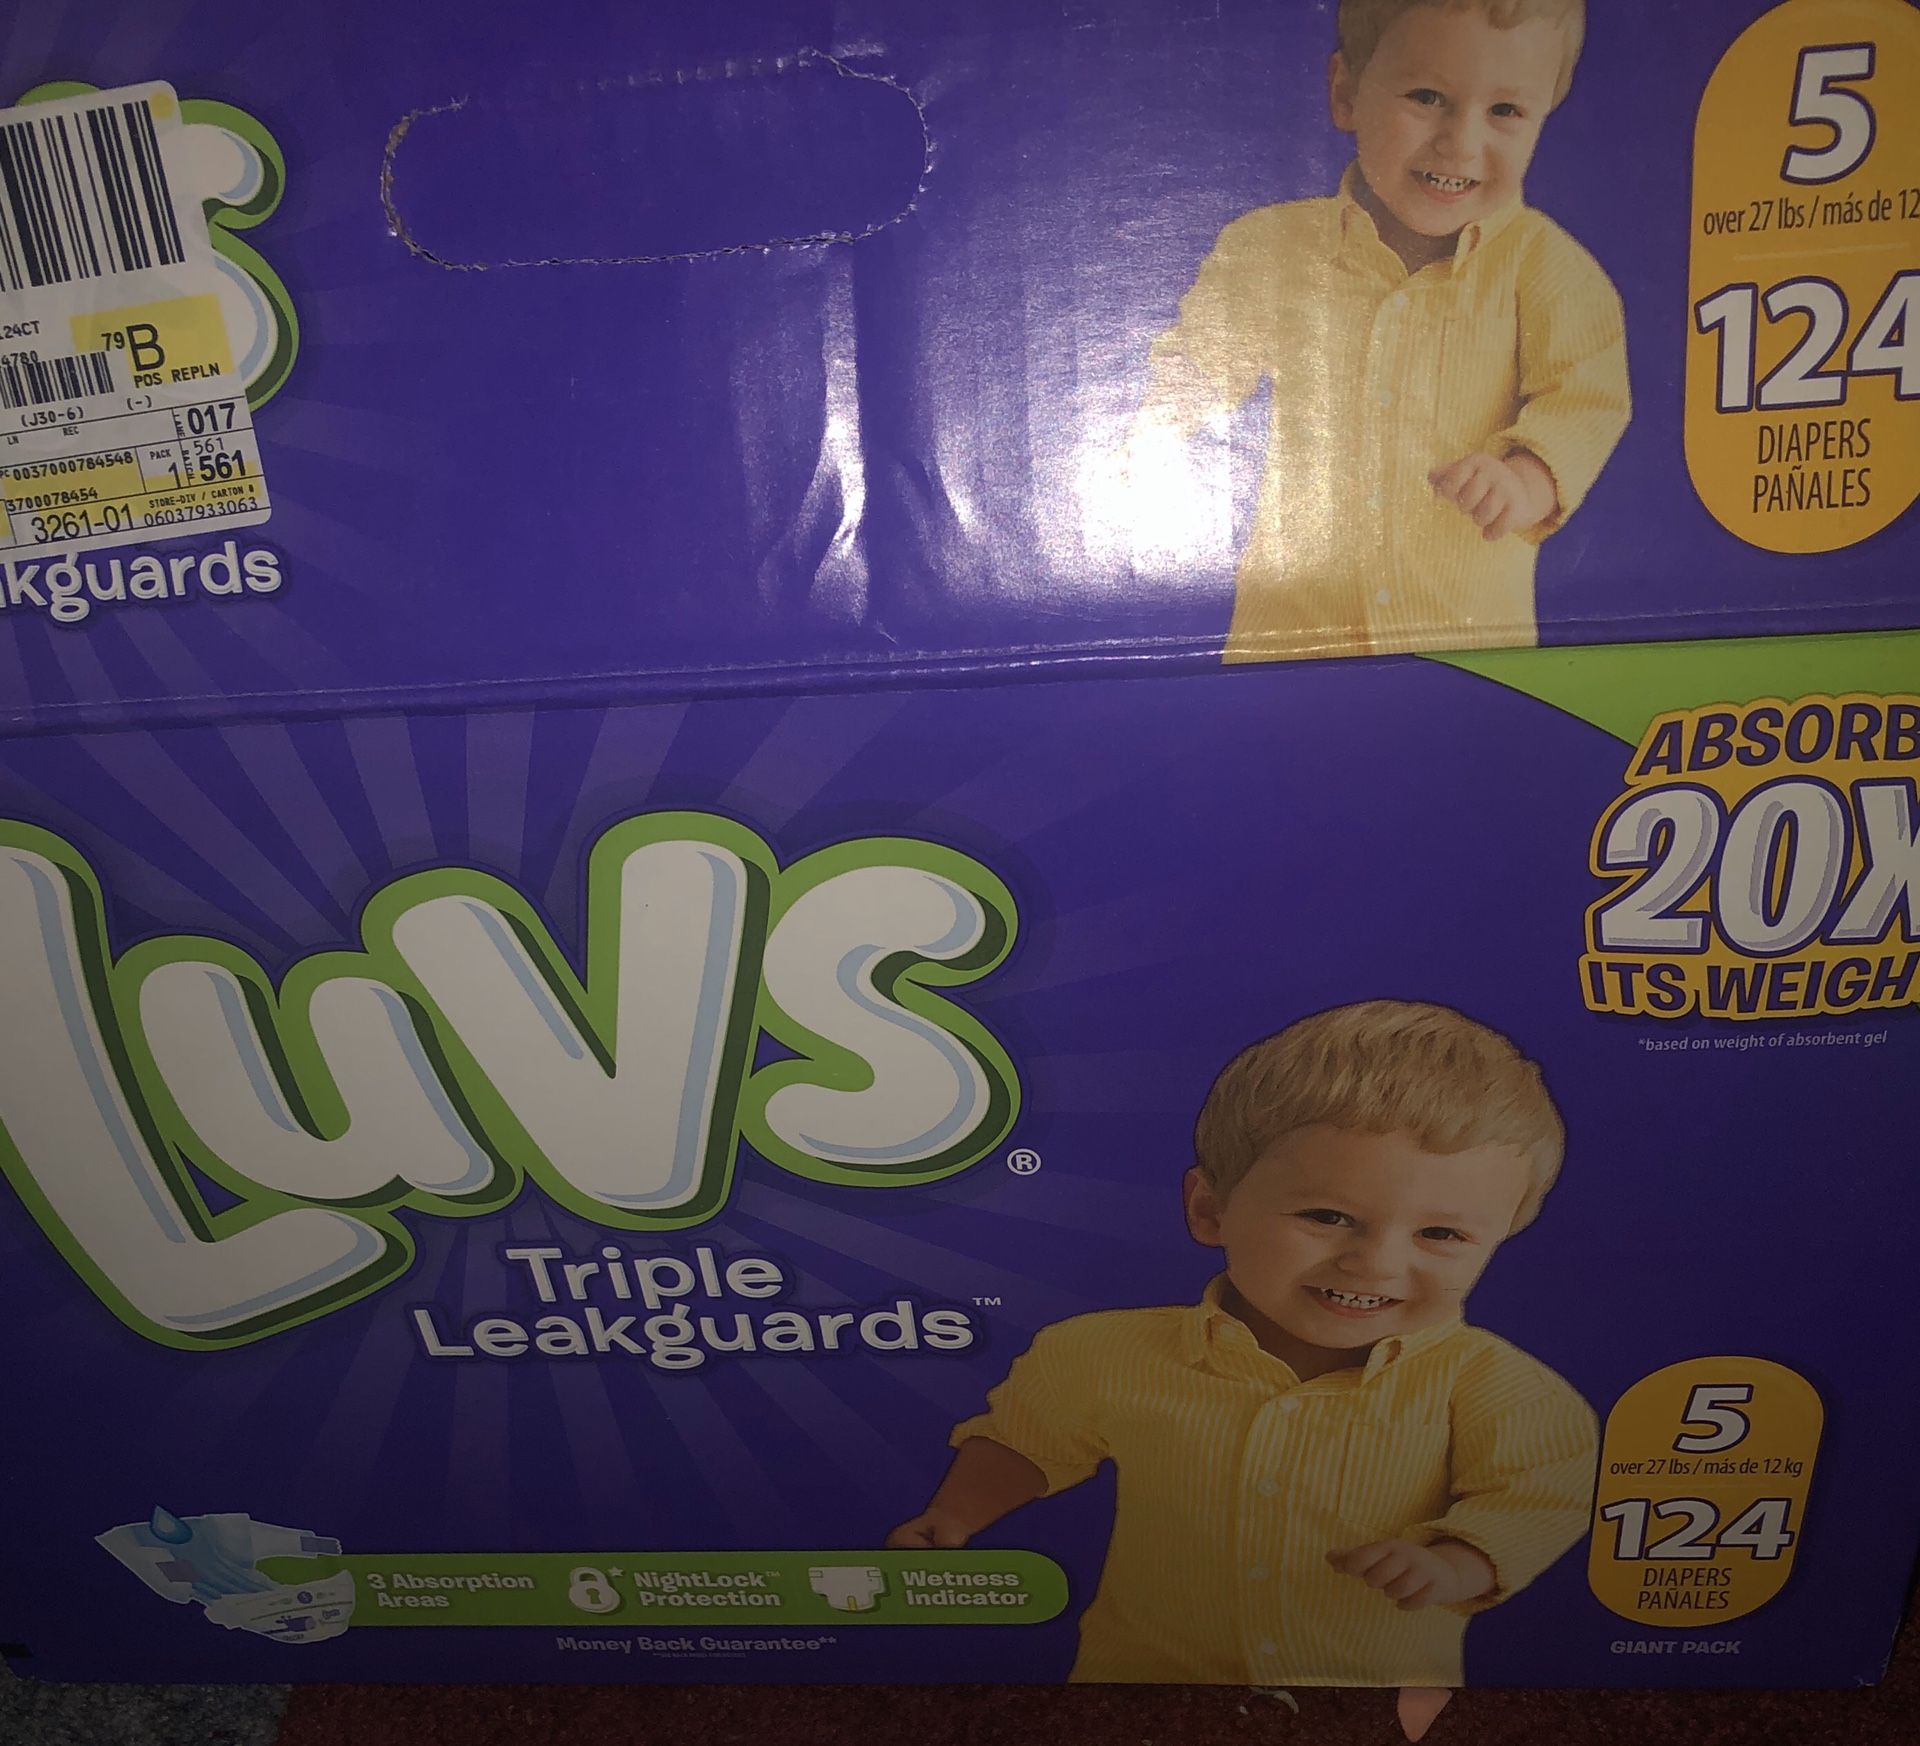 Luvs diapers size 5 (62 count)